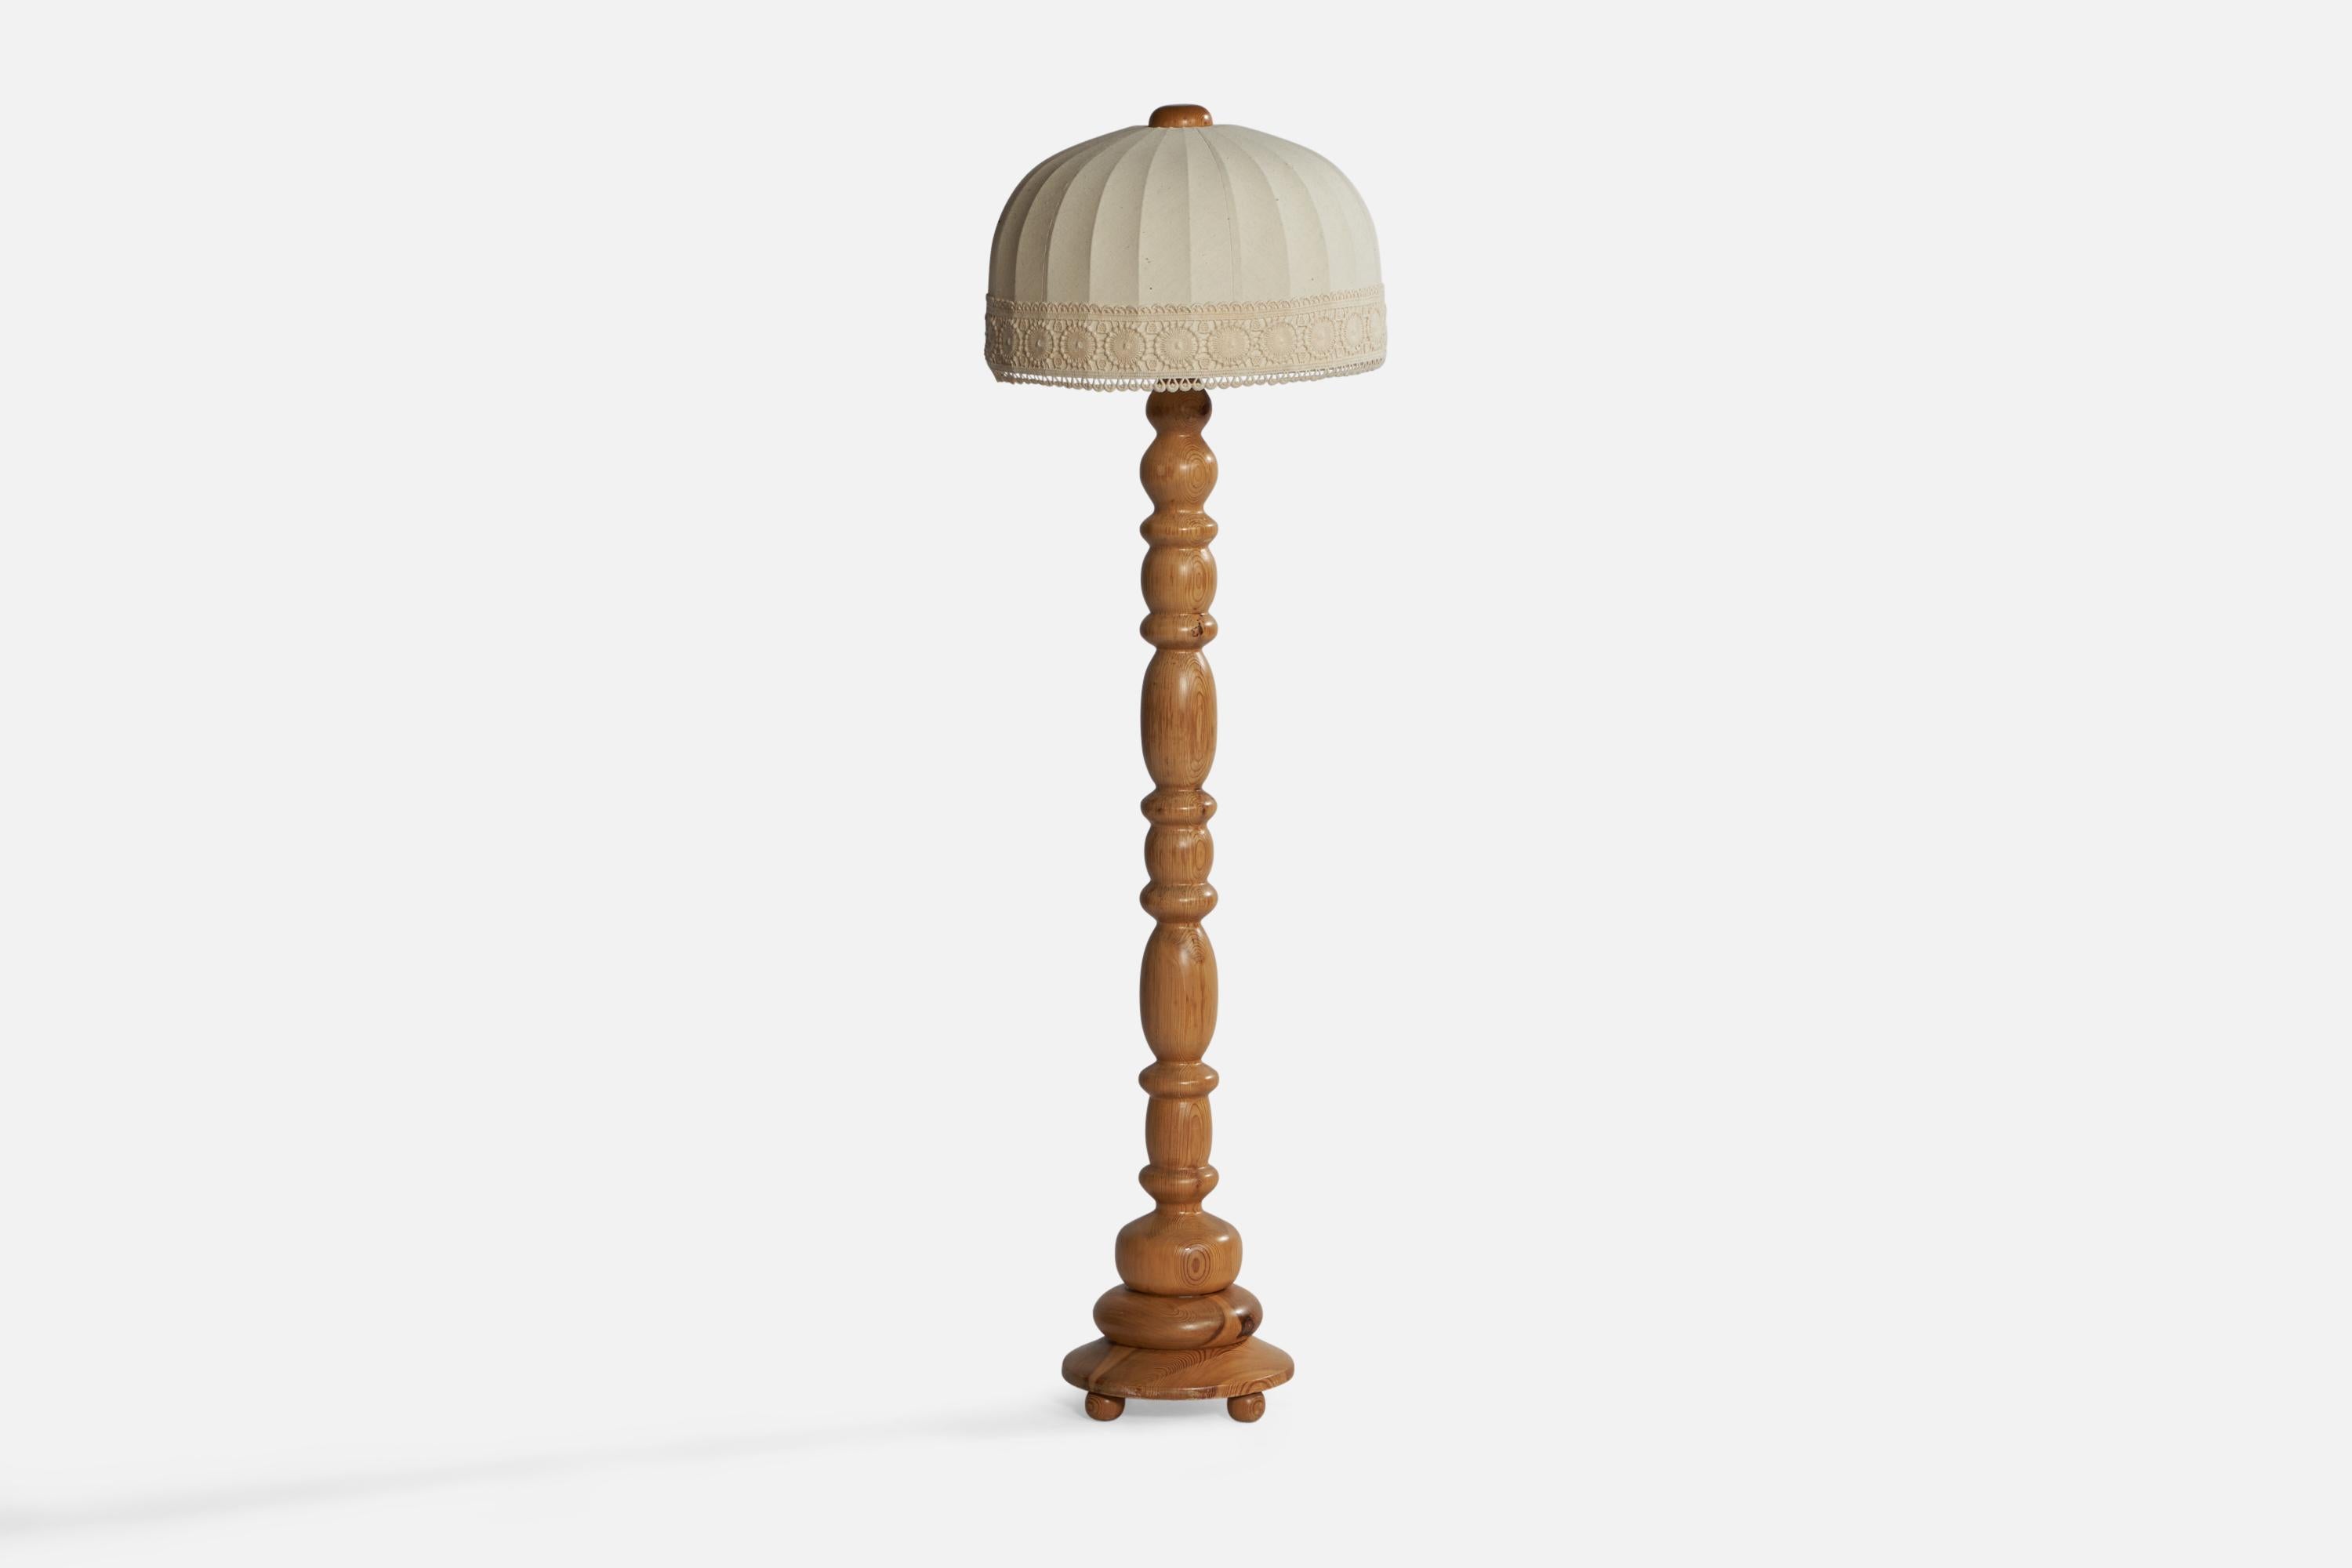 A turned pine and off-white fabric floor lamp designed and produced in Sweden, c. 1970s.

Overall Dimensions (inches): 53” H x 16” Diameter. Stated dimensions include shade.
Bulb Specifications: E-26 Bulb
Number of Sockets: 1
All lighting will be